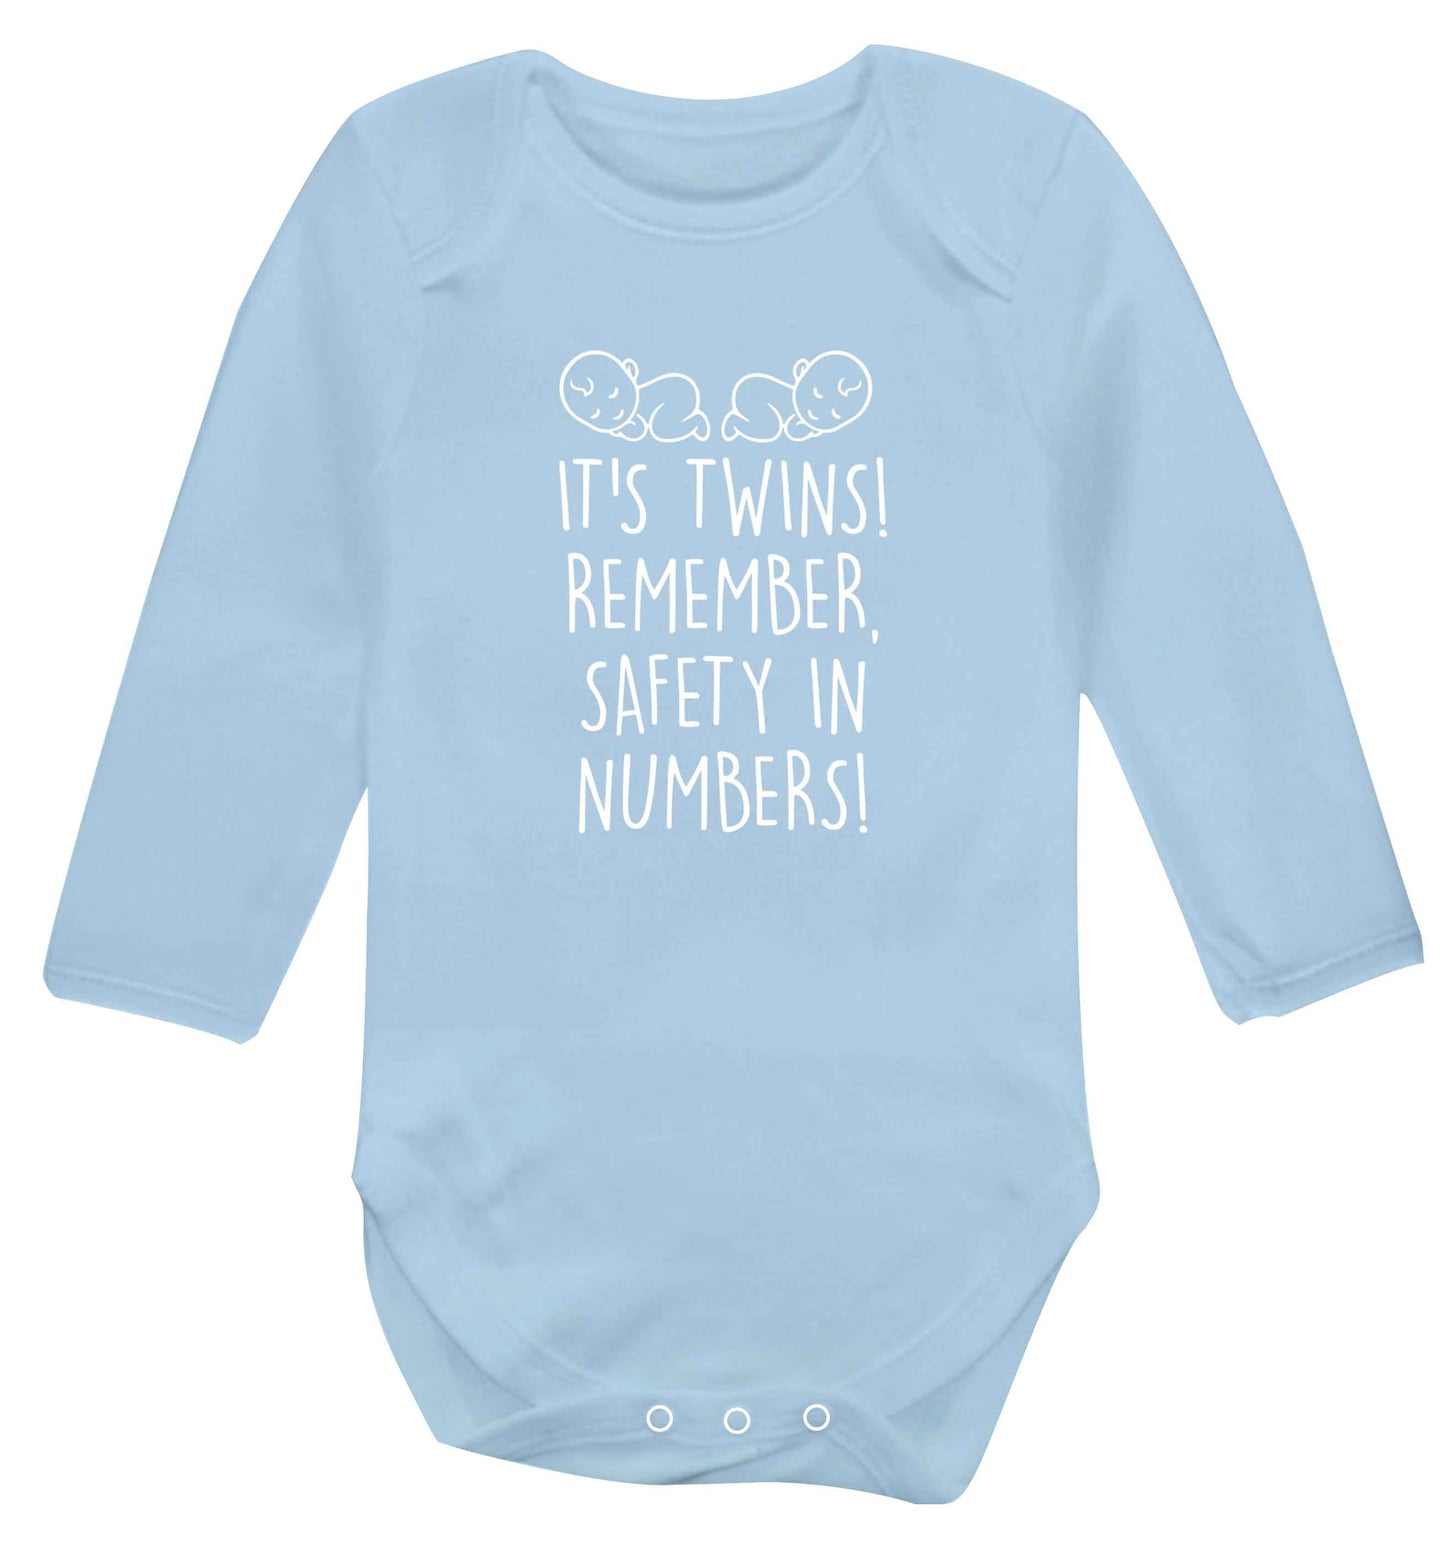 It's twins! Remember safety in numbers! baby vest long sleeved pale blue 6-12 months